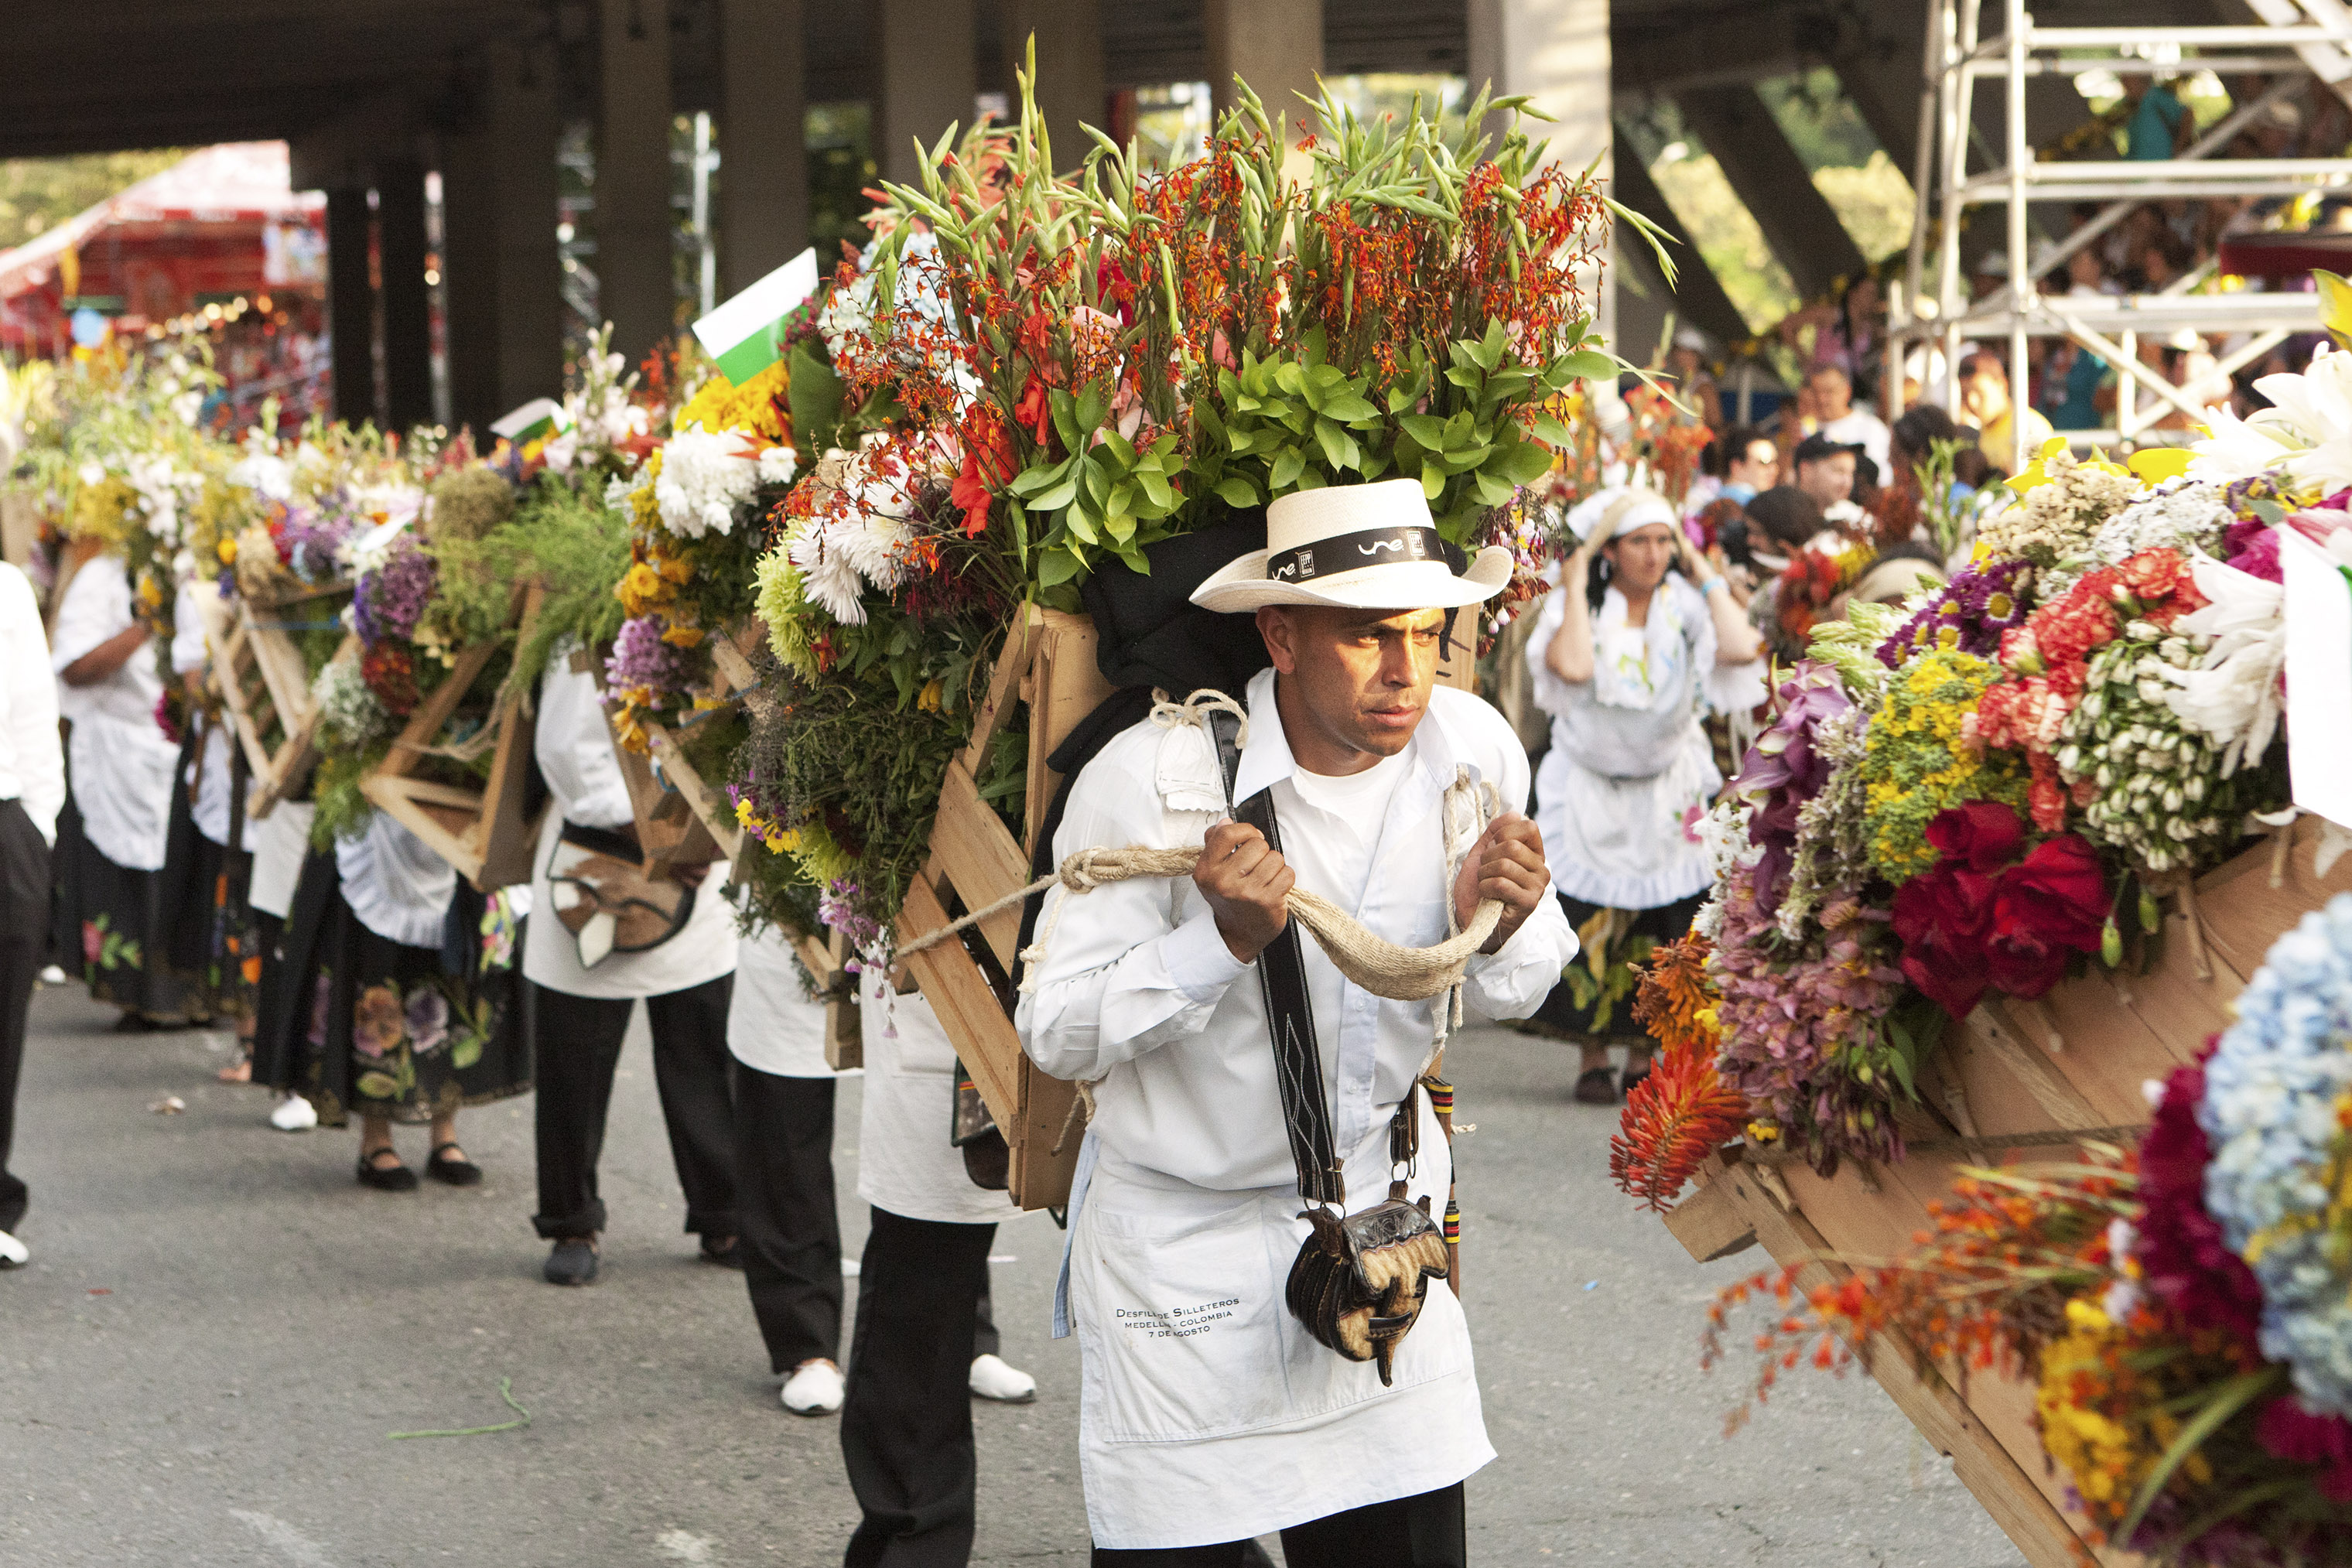 The Festival of the Flowers takes place each August in MedelliÌn